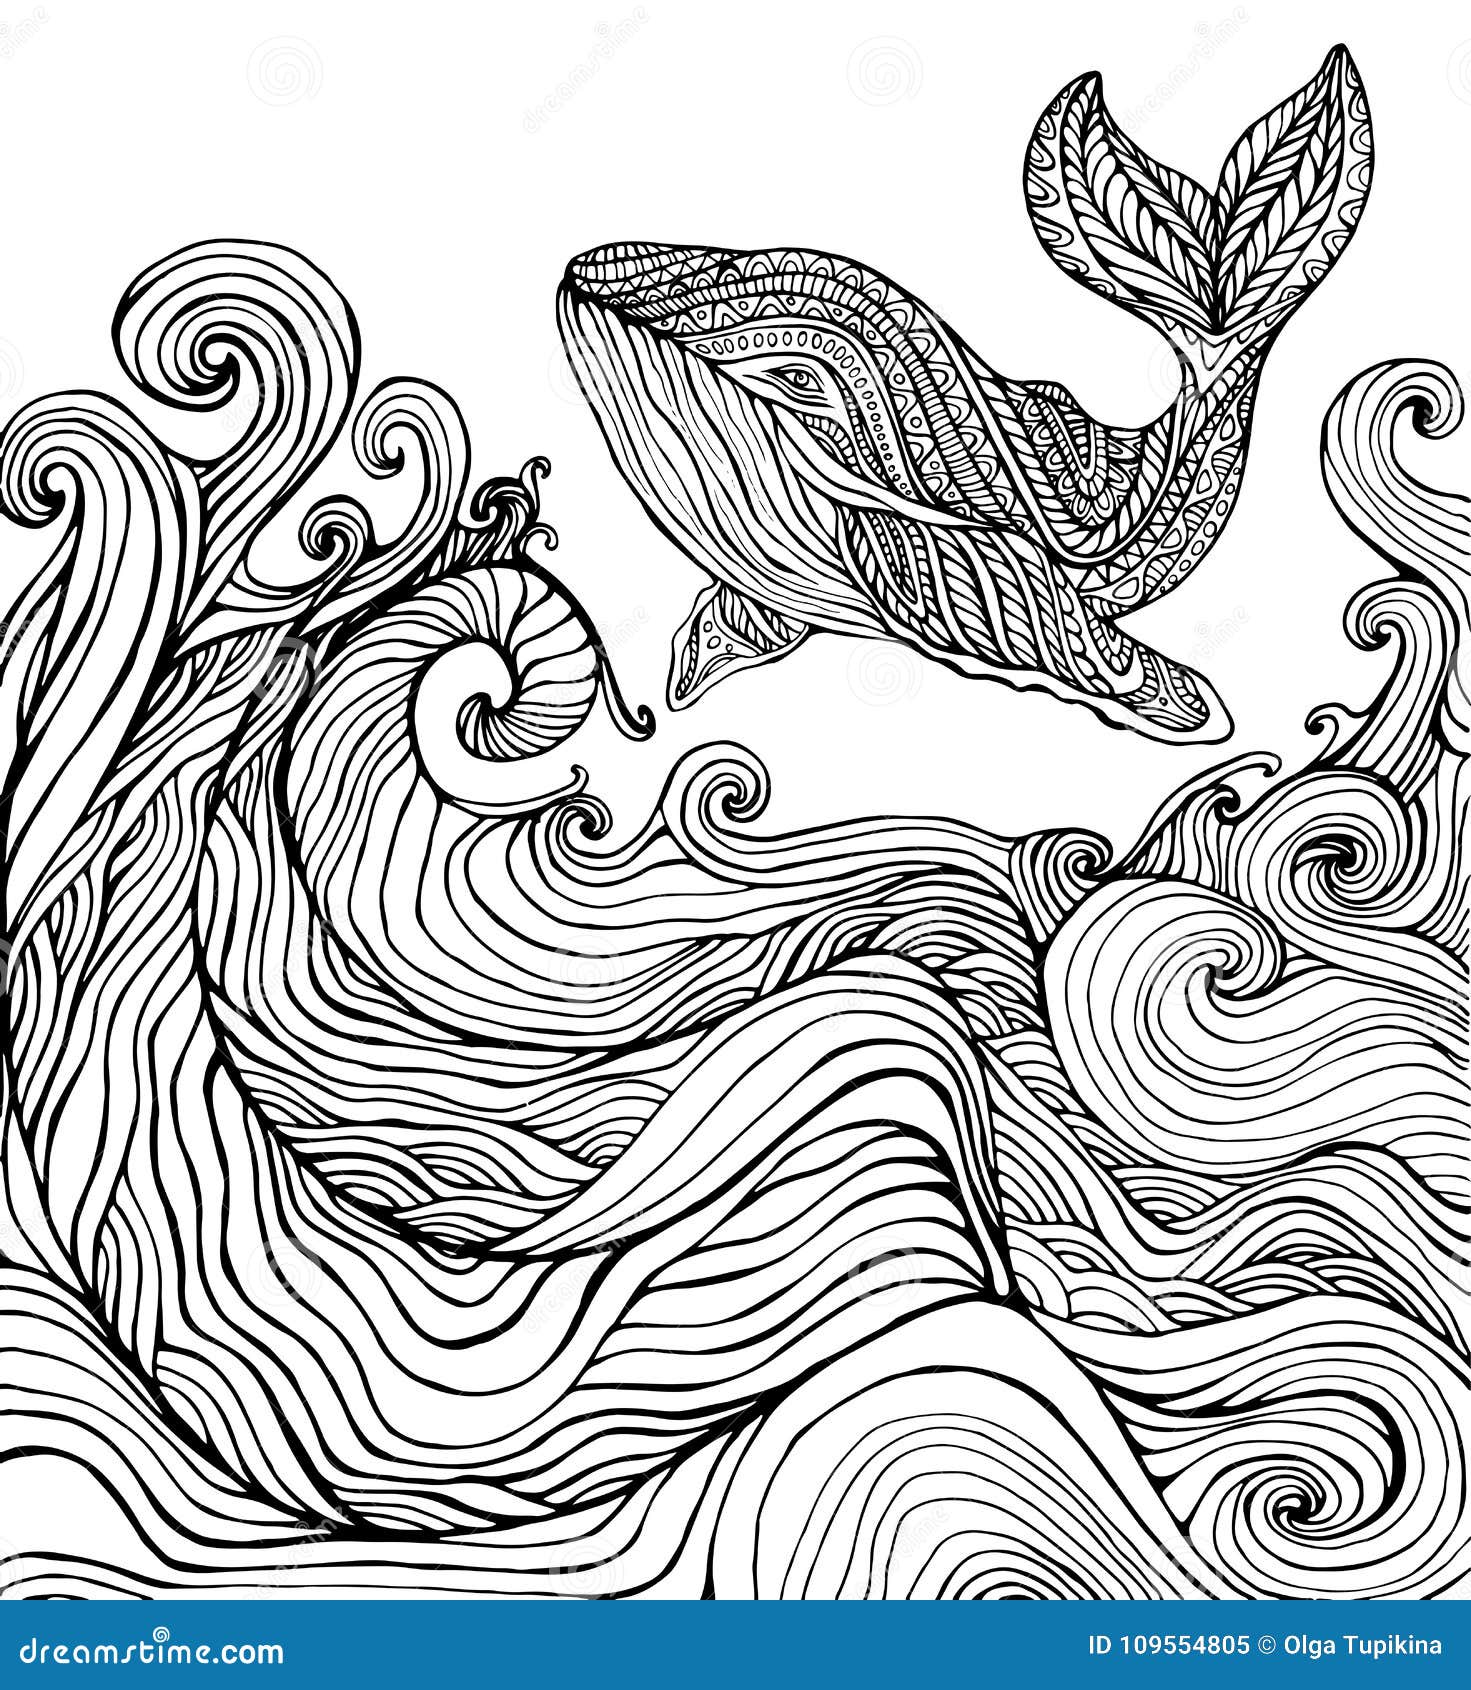 Whale And Ocean Waves Coloring Page Stock Vector 